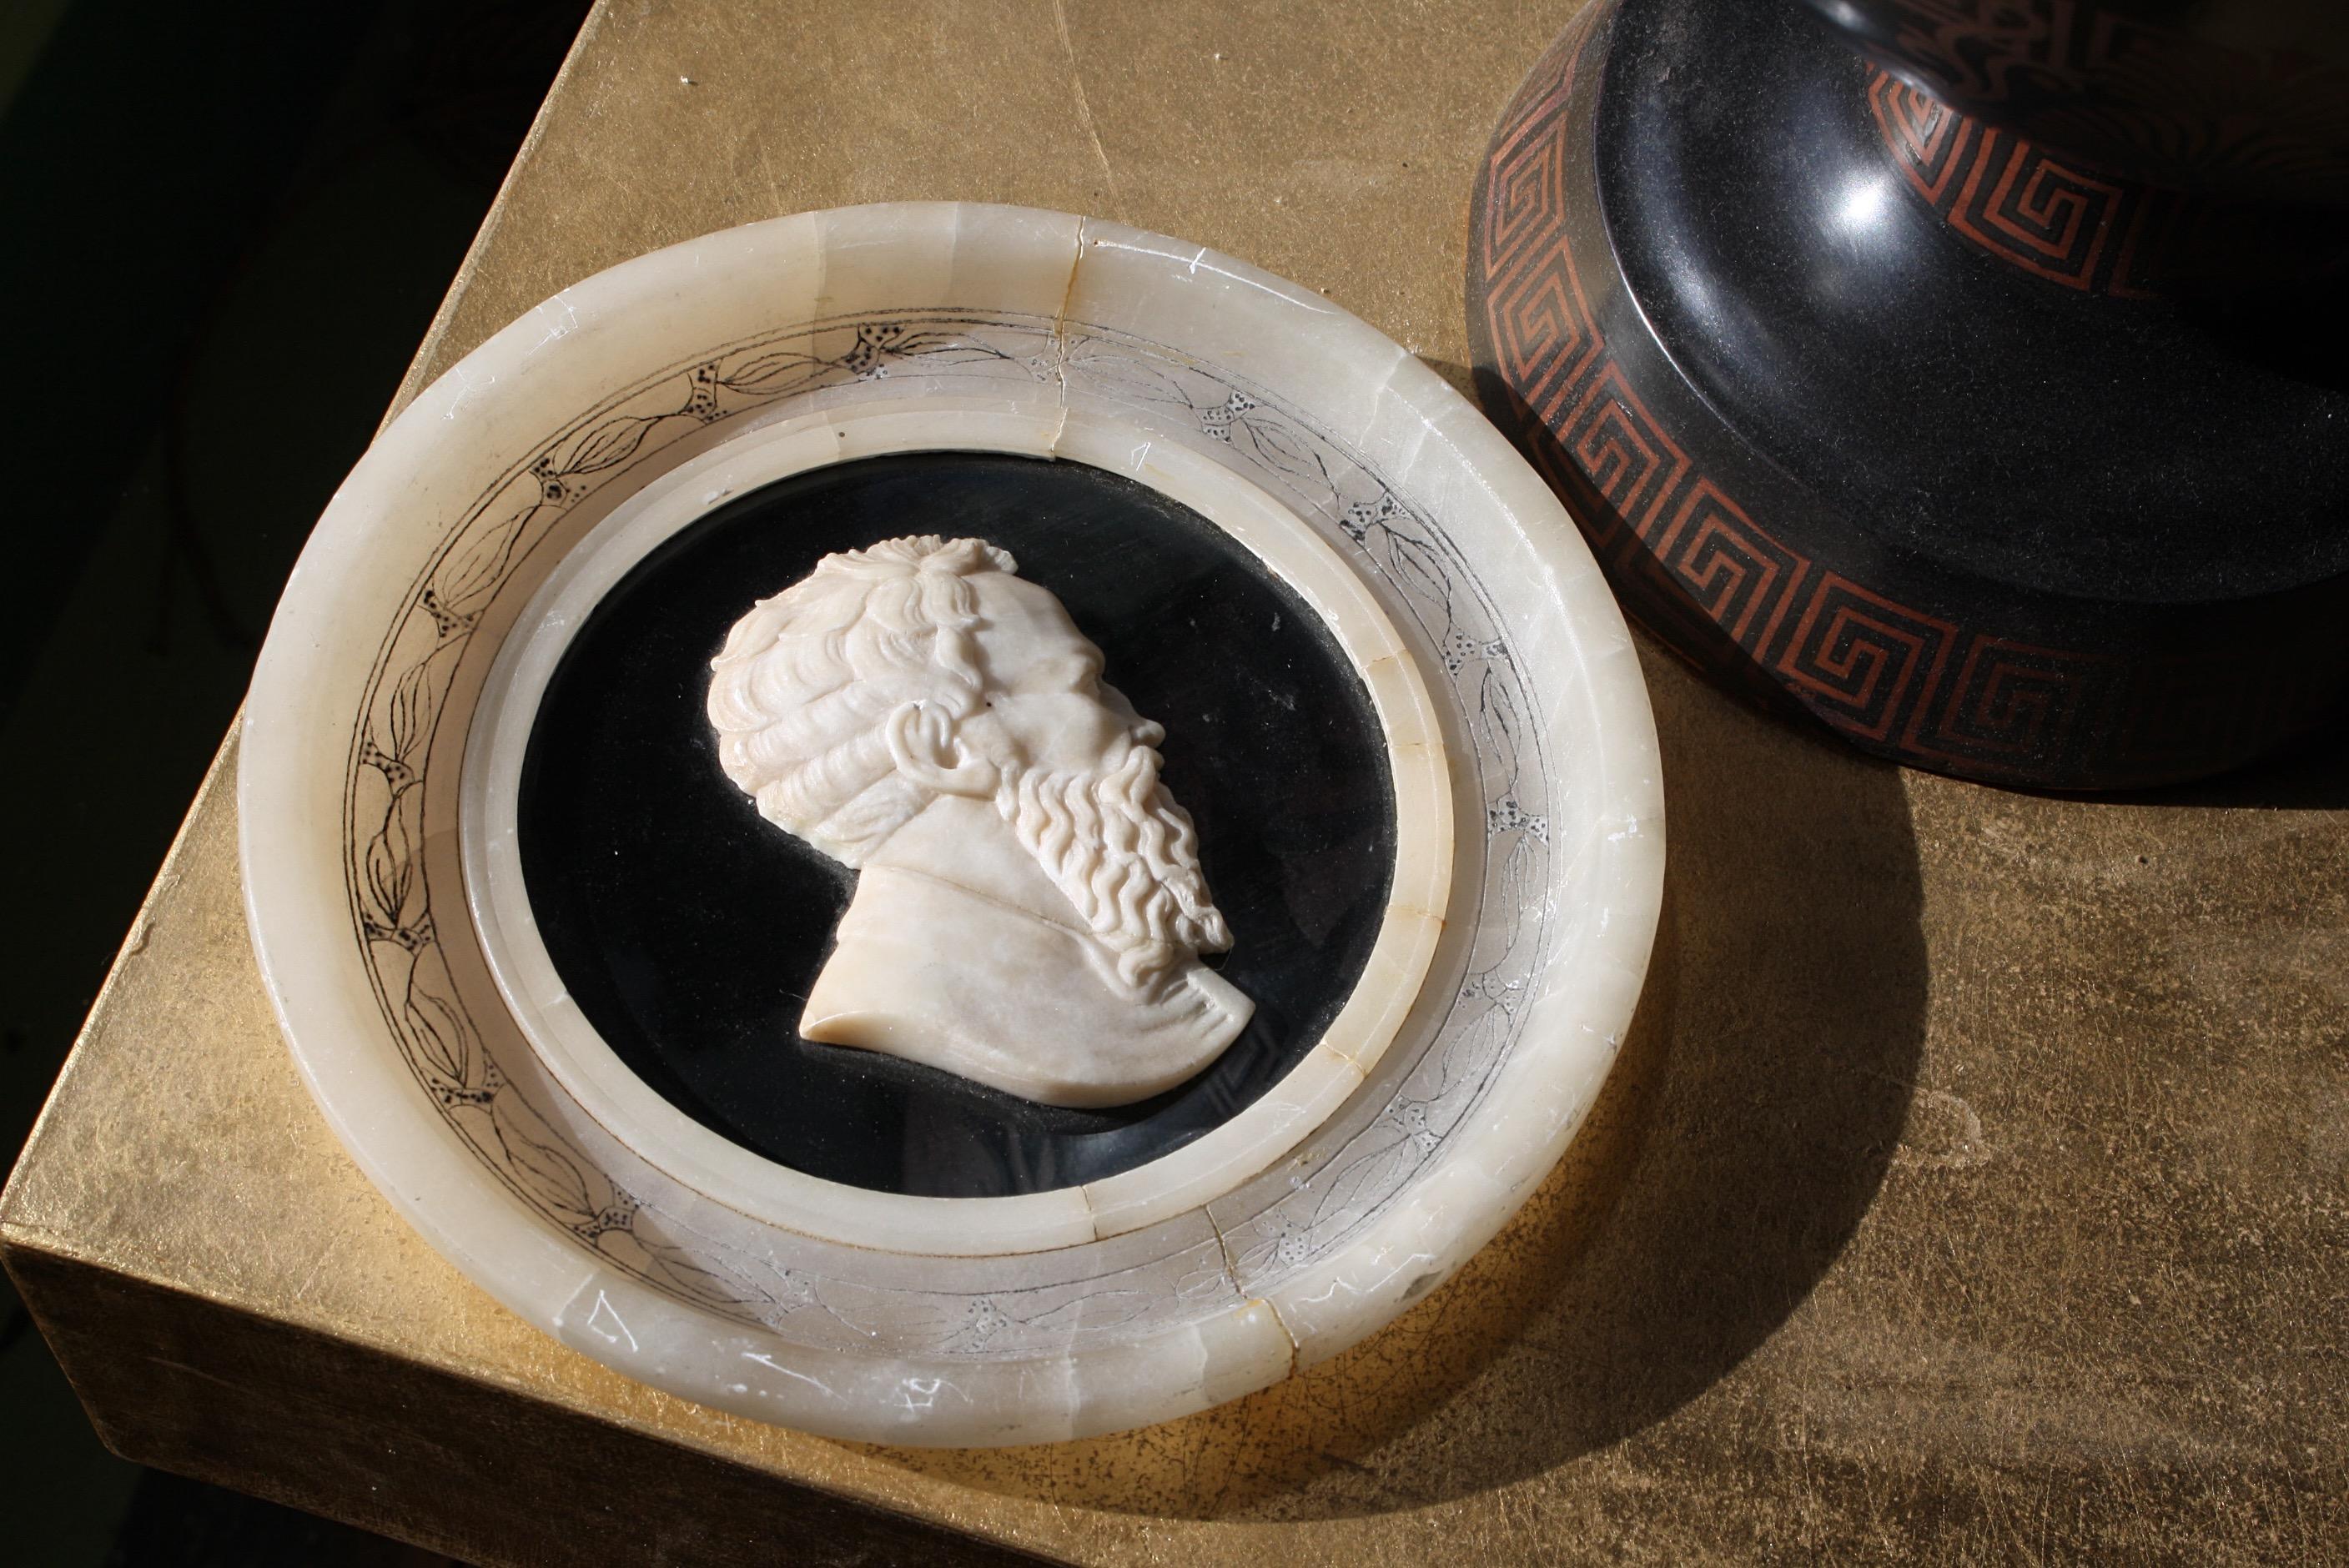 A fine profile portrait roundel of an elderly gent, mounted on a contrasting Ashford black marble ground on an alabaster roundel withs graffito and inked decoration.

19th century in age European in origins

Some elderly repairs are apparent,